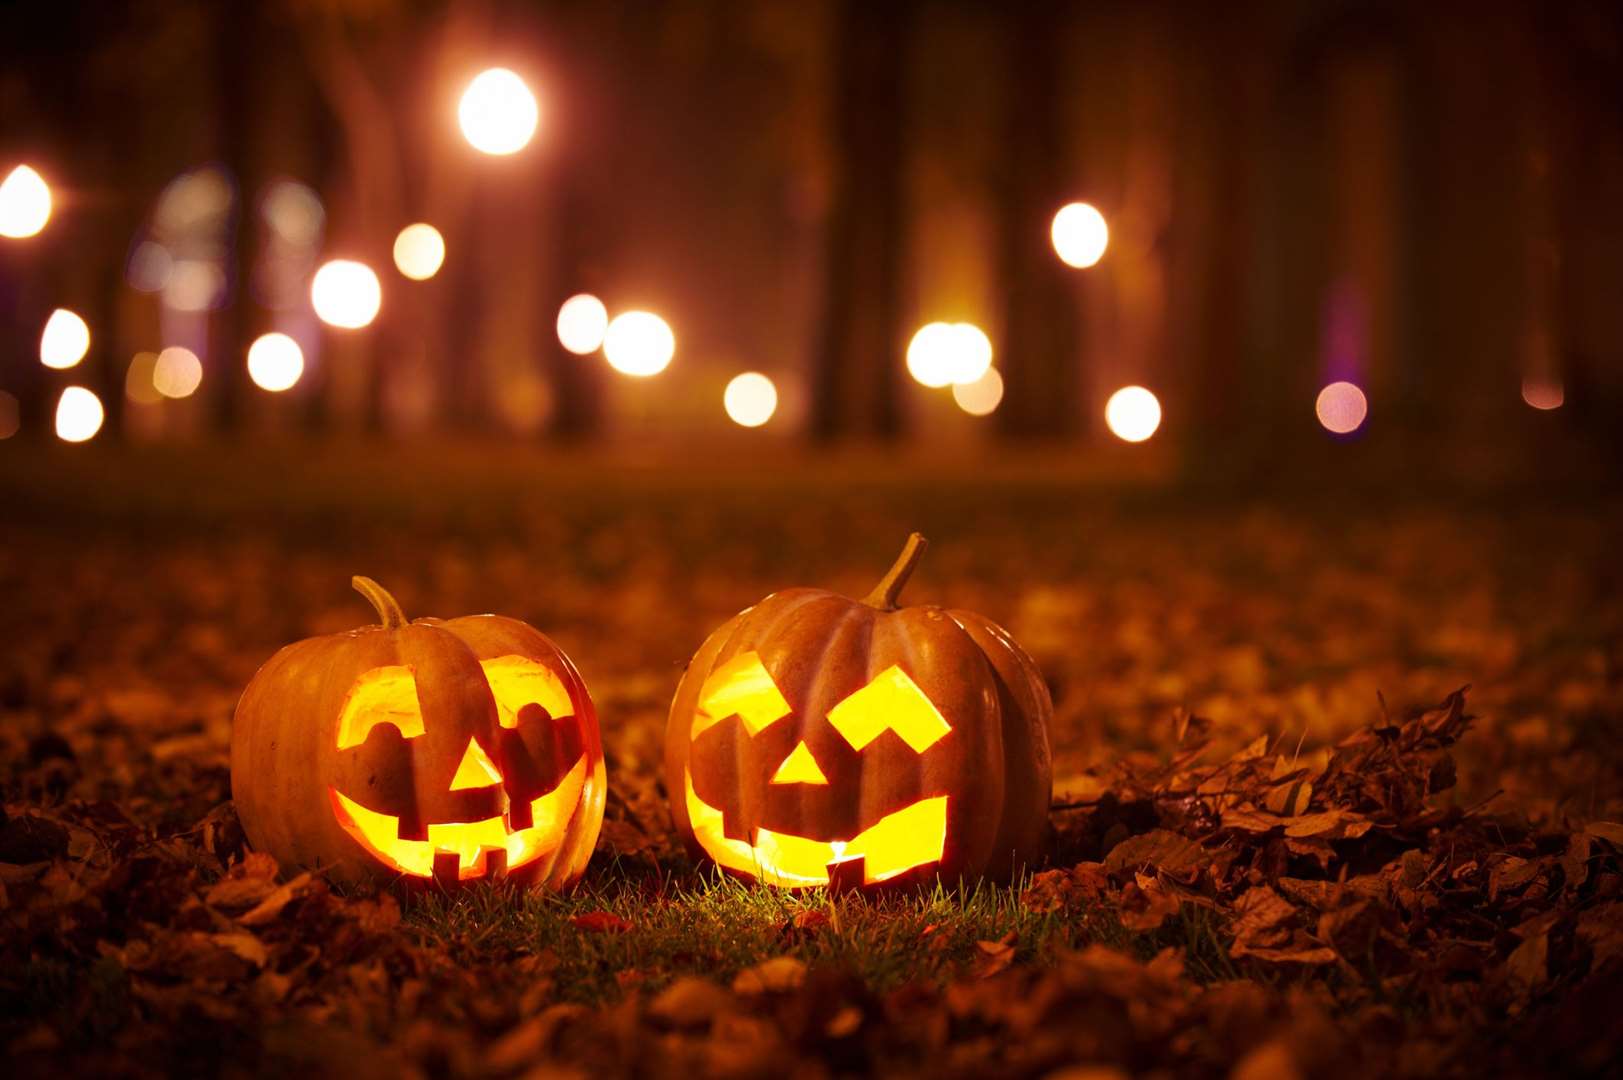 With Halloween falling on a Saturday night, families are keen to celebrate